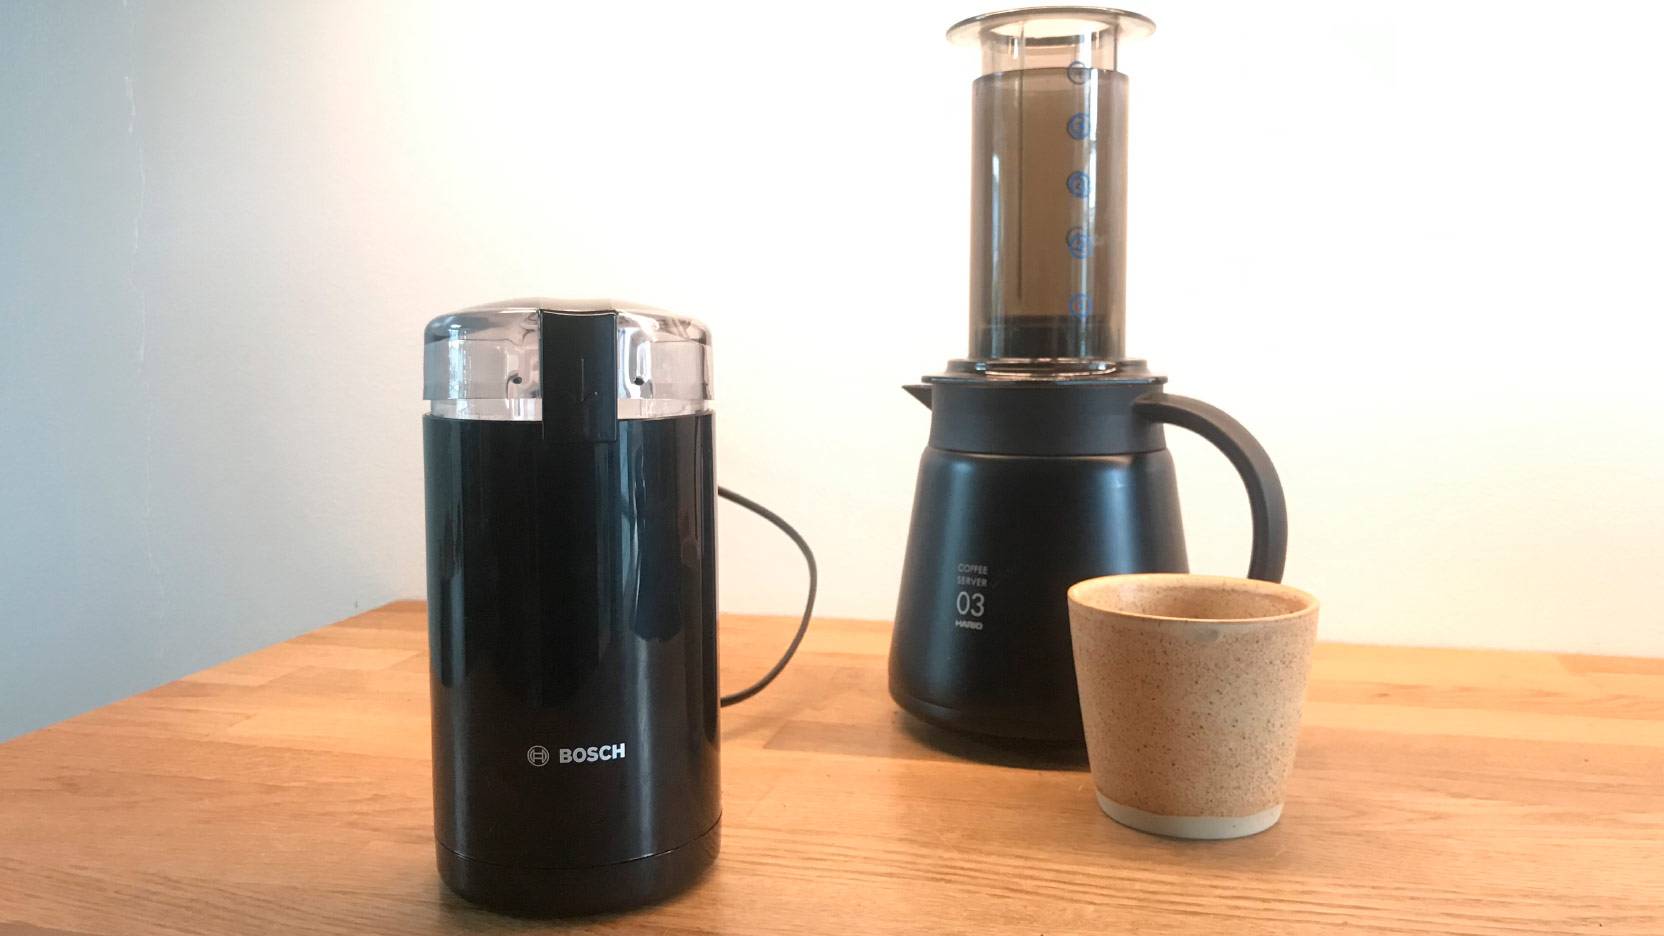 Image of Bosch TSM6A013 coffee mill on kitchen counter with Hario AeroPress in the background